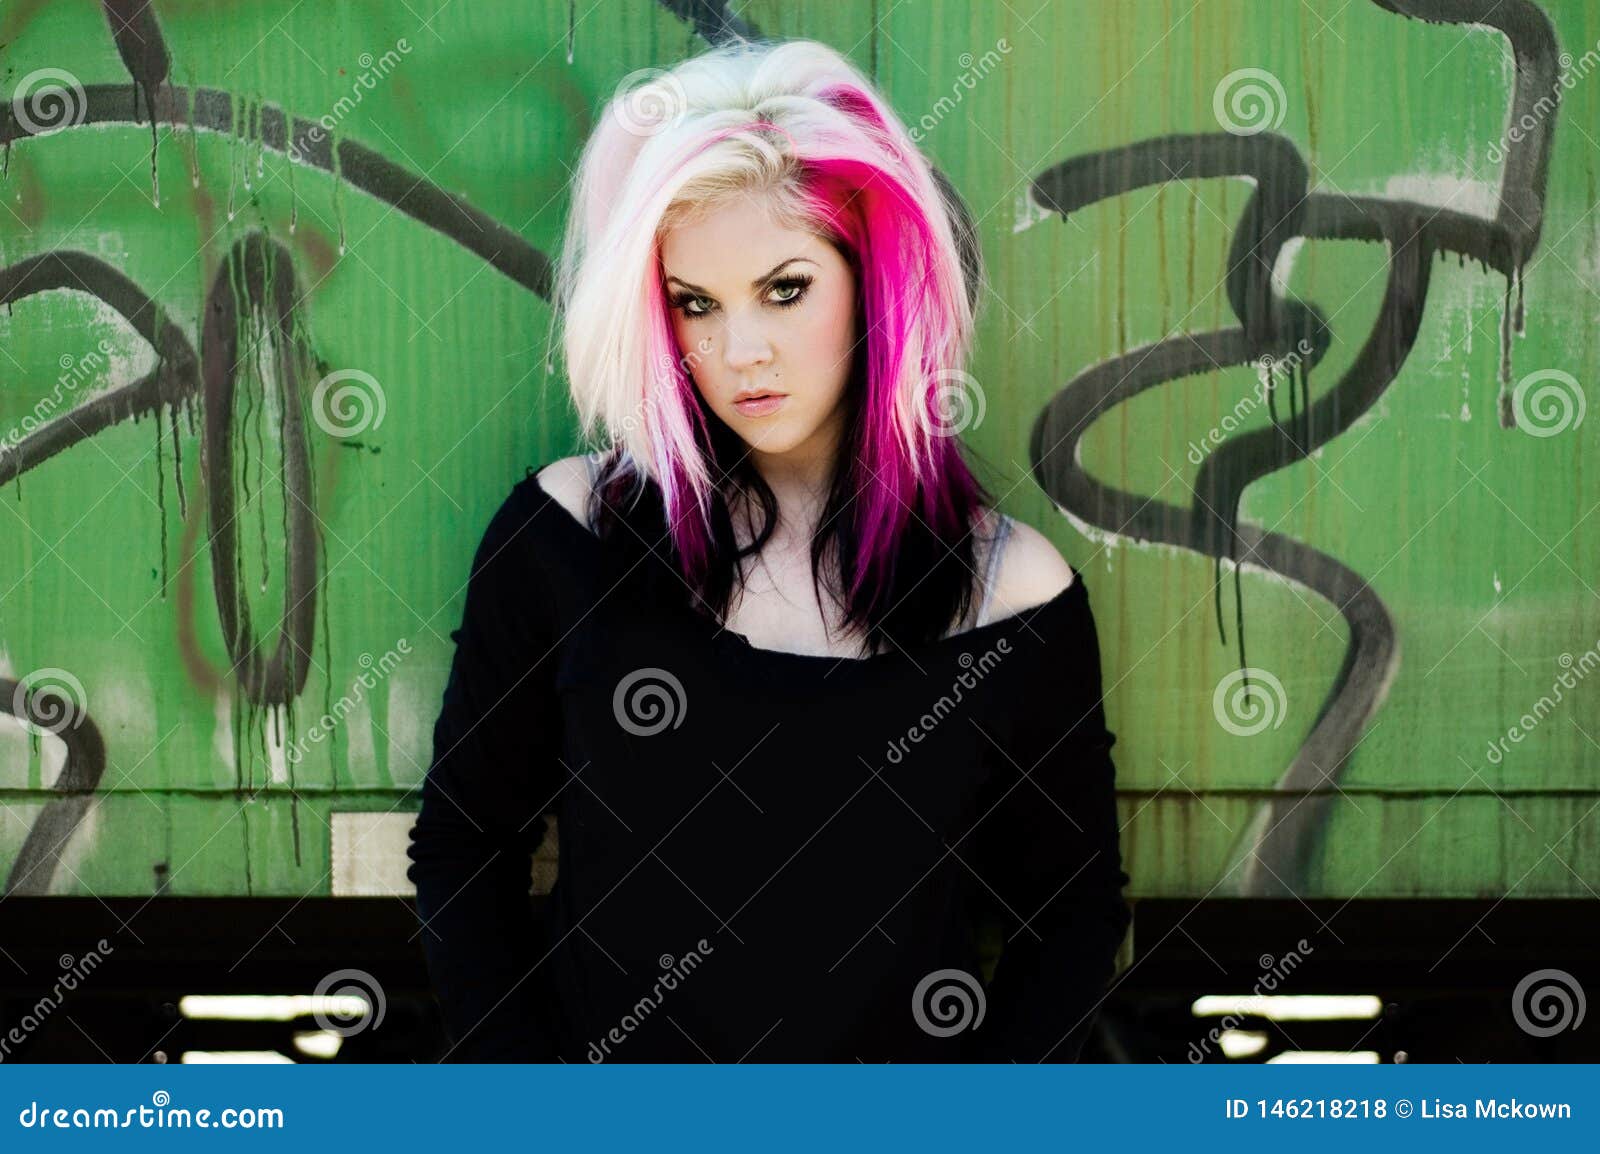 Punk girl with blue hair - wide 5